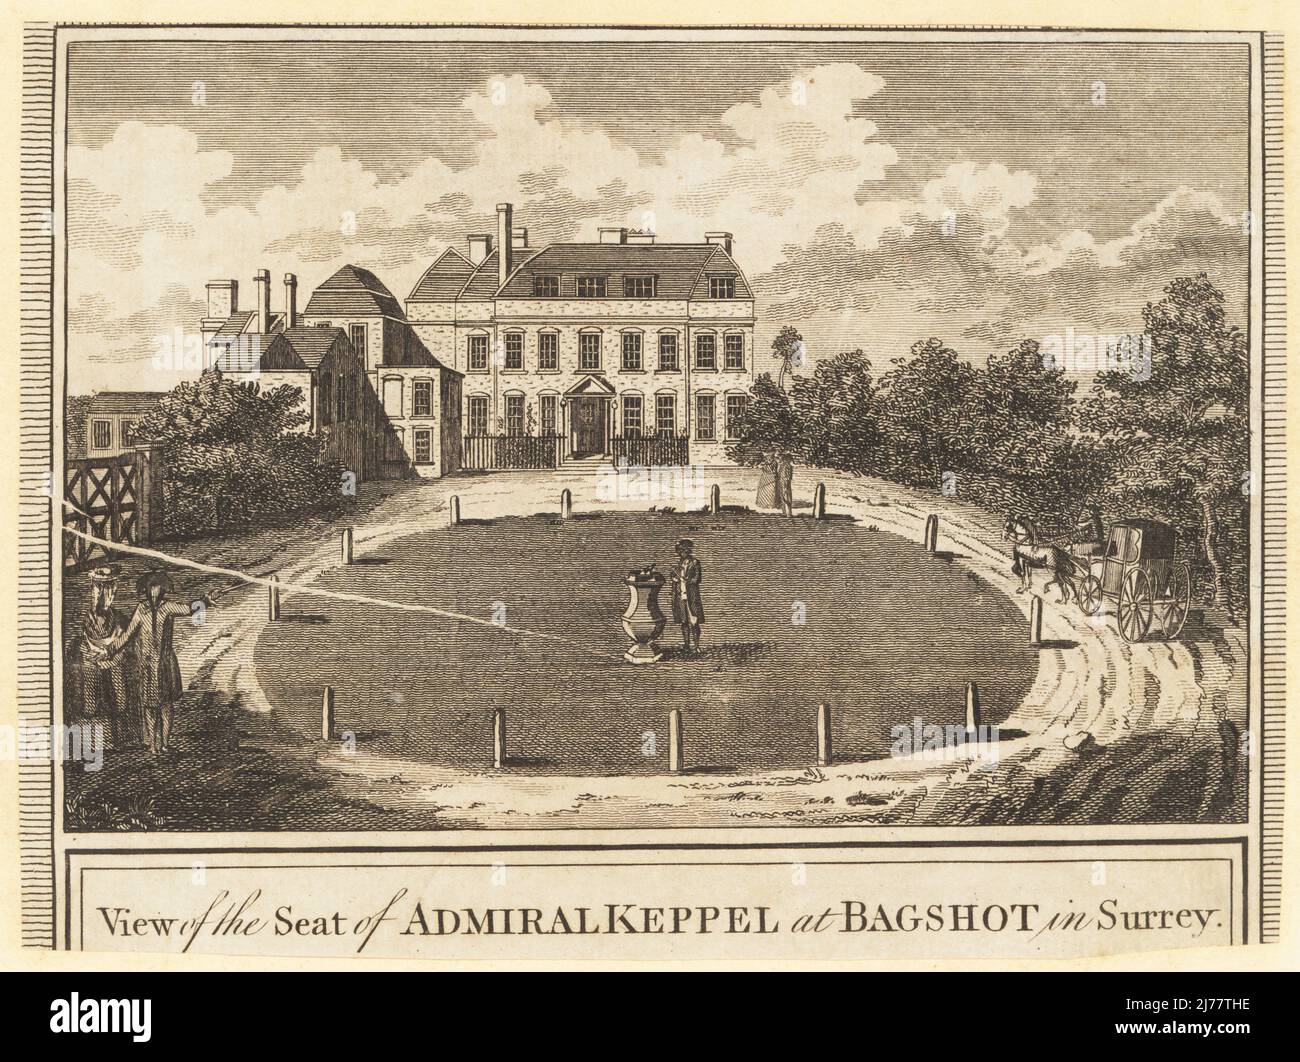 View of Bagshot Lodge, Surrey. Built in the 17th century by Inigo Jones, remodelled in the 1760s by architect James Paine for General George Keppel, Earl of Albemarle. A man stands next to a sundial in the garden. View of the seat of Admiral Keppel at Bagshot in Surrey. Copperplate engraving by Page from William Thornton’s New History and Survey of London, published by Alexander Hogg at the King’s Arms, 16 Paternoster Row, London, 1784. Stock Photo